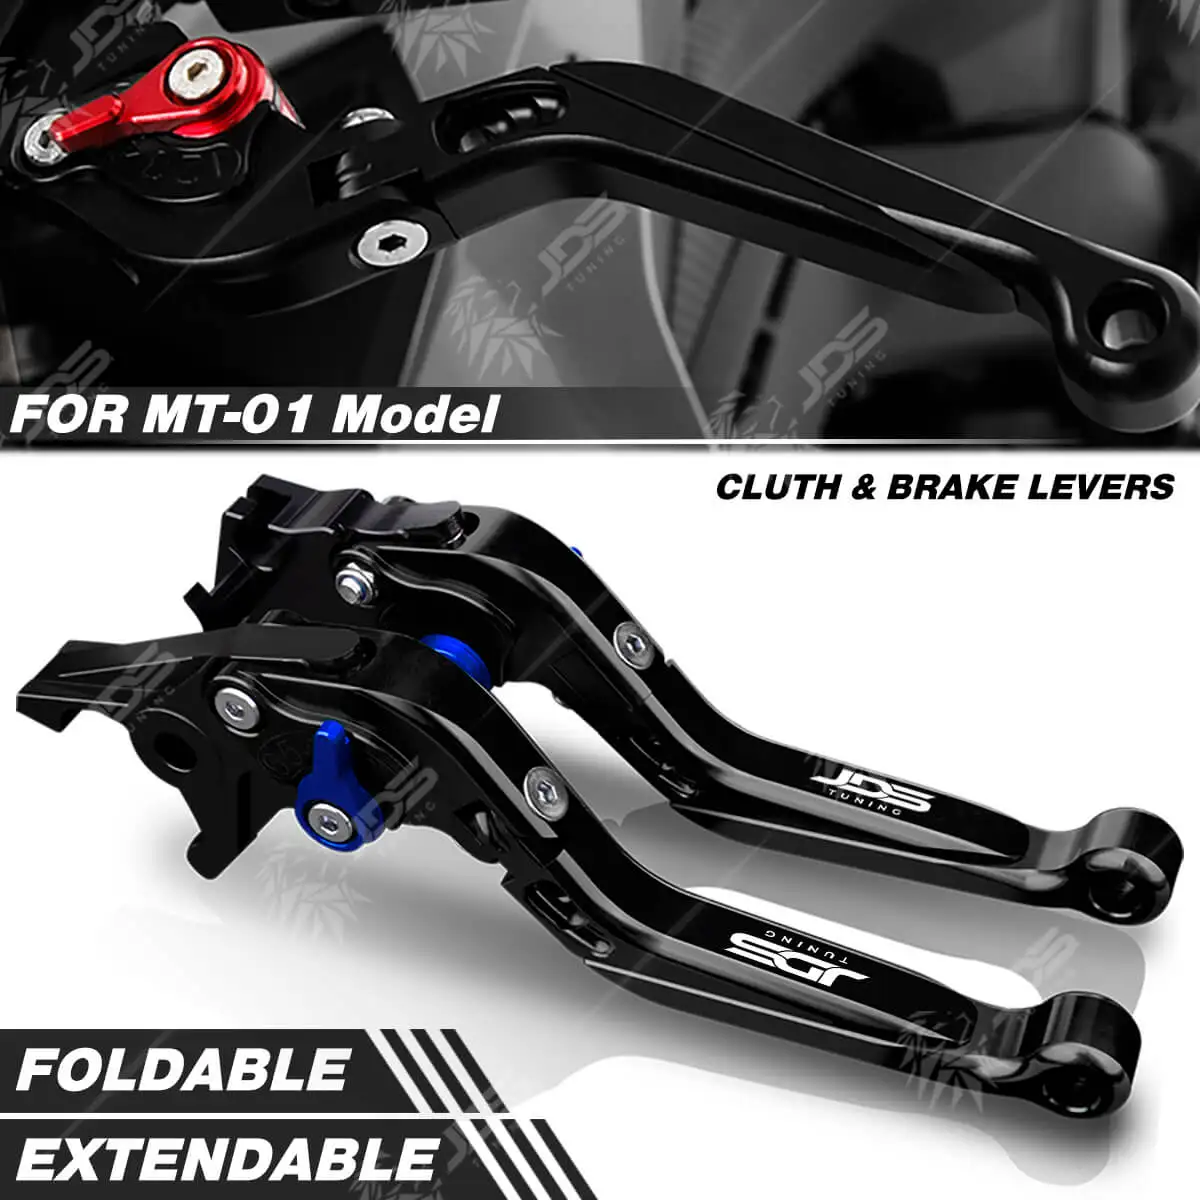 

For Yamaha MT01 MT 01 2005-2012 Clutch Lever Brake Lever Set Foldable Adjustable Handle Levers Motorcycle Accessories Parts